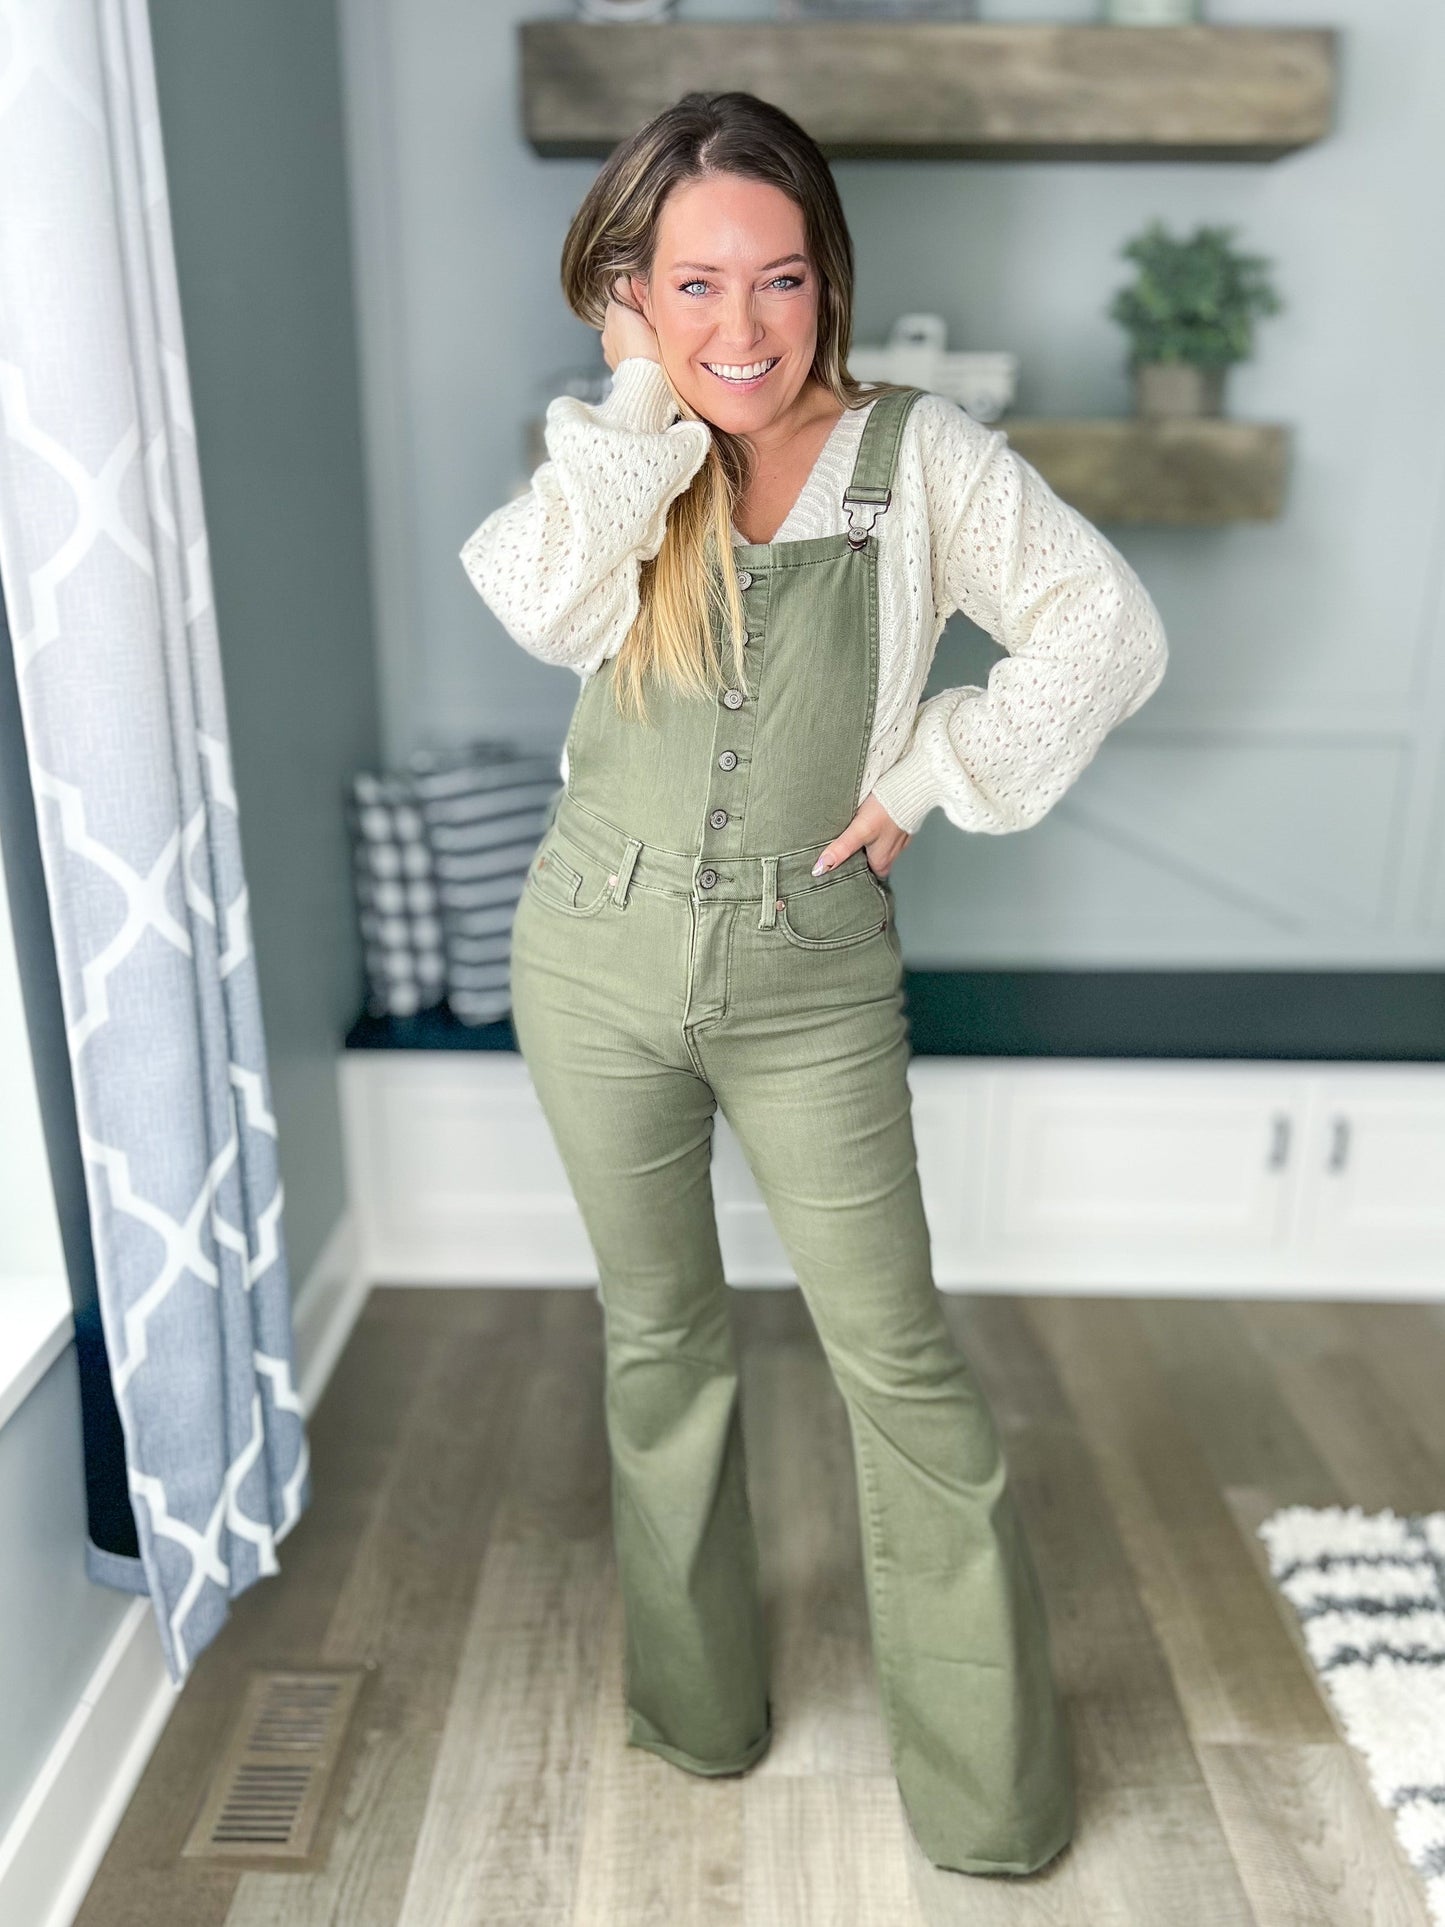 Olive to Feel Fab Judy Blue Tummy Control Overall